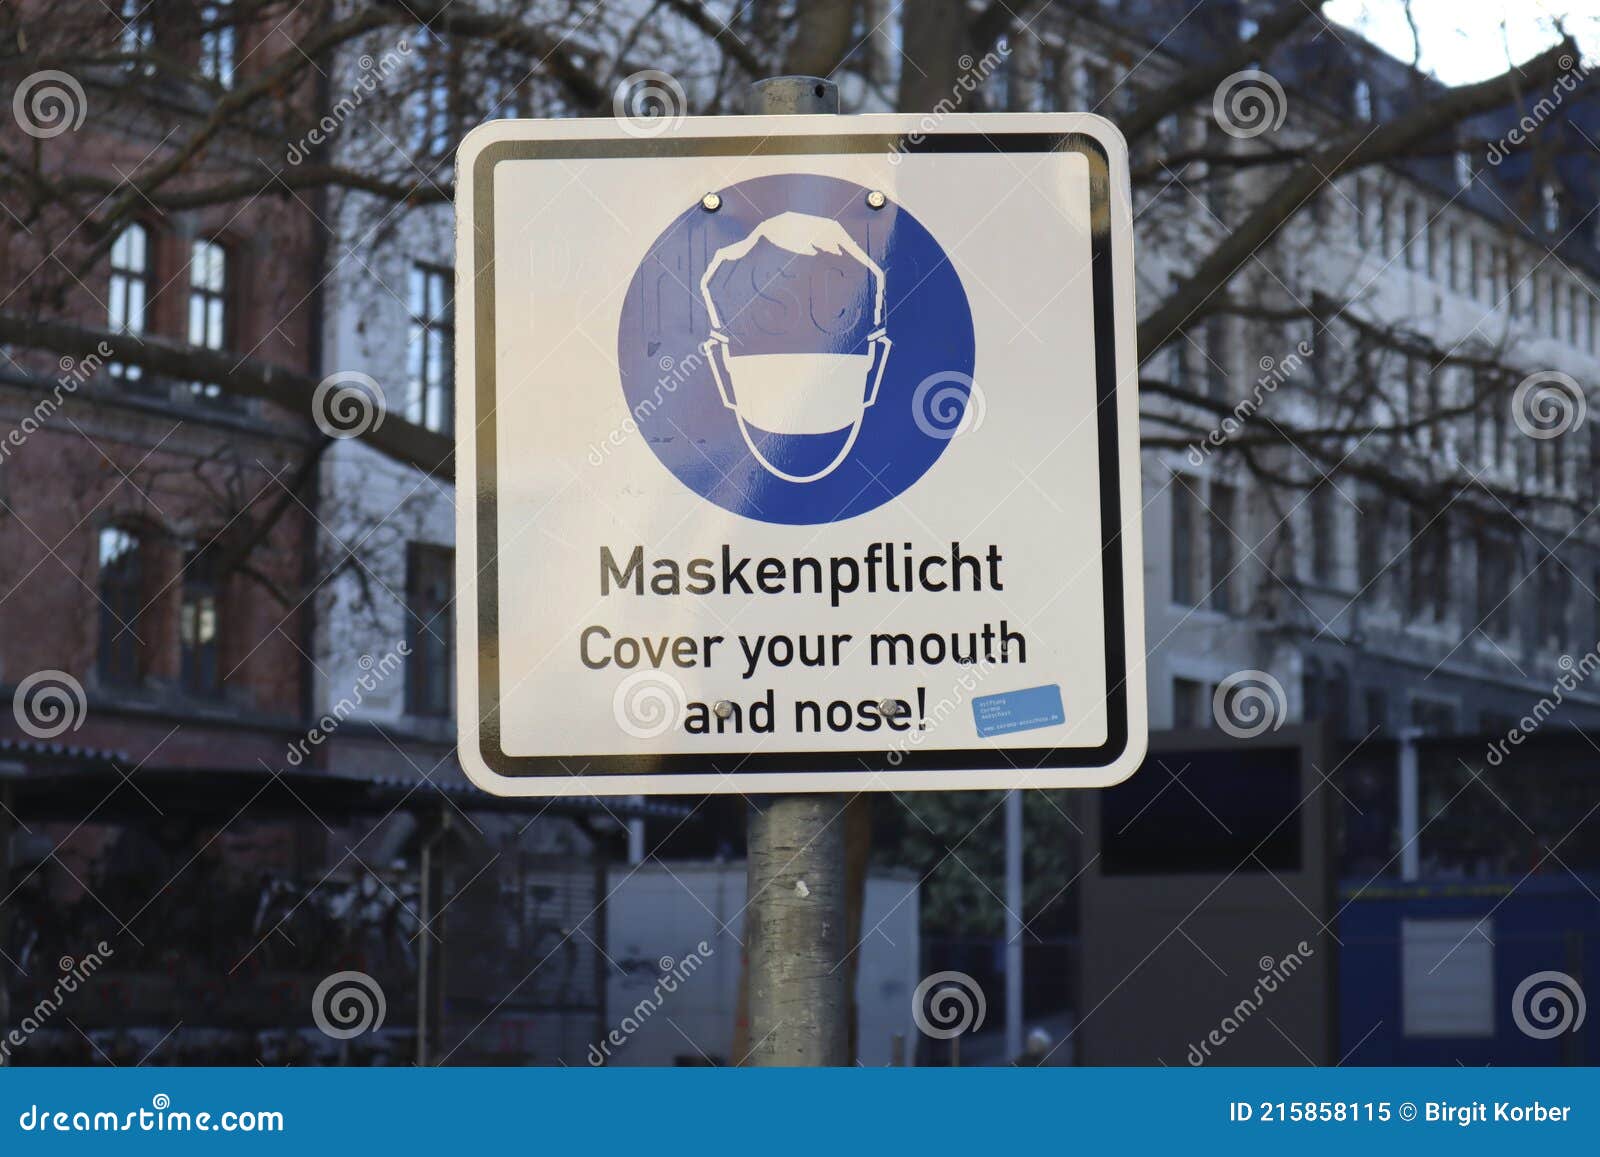 germany travel mask requirements